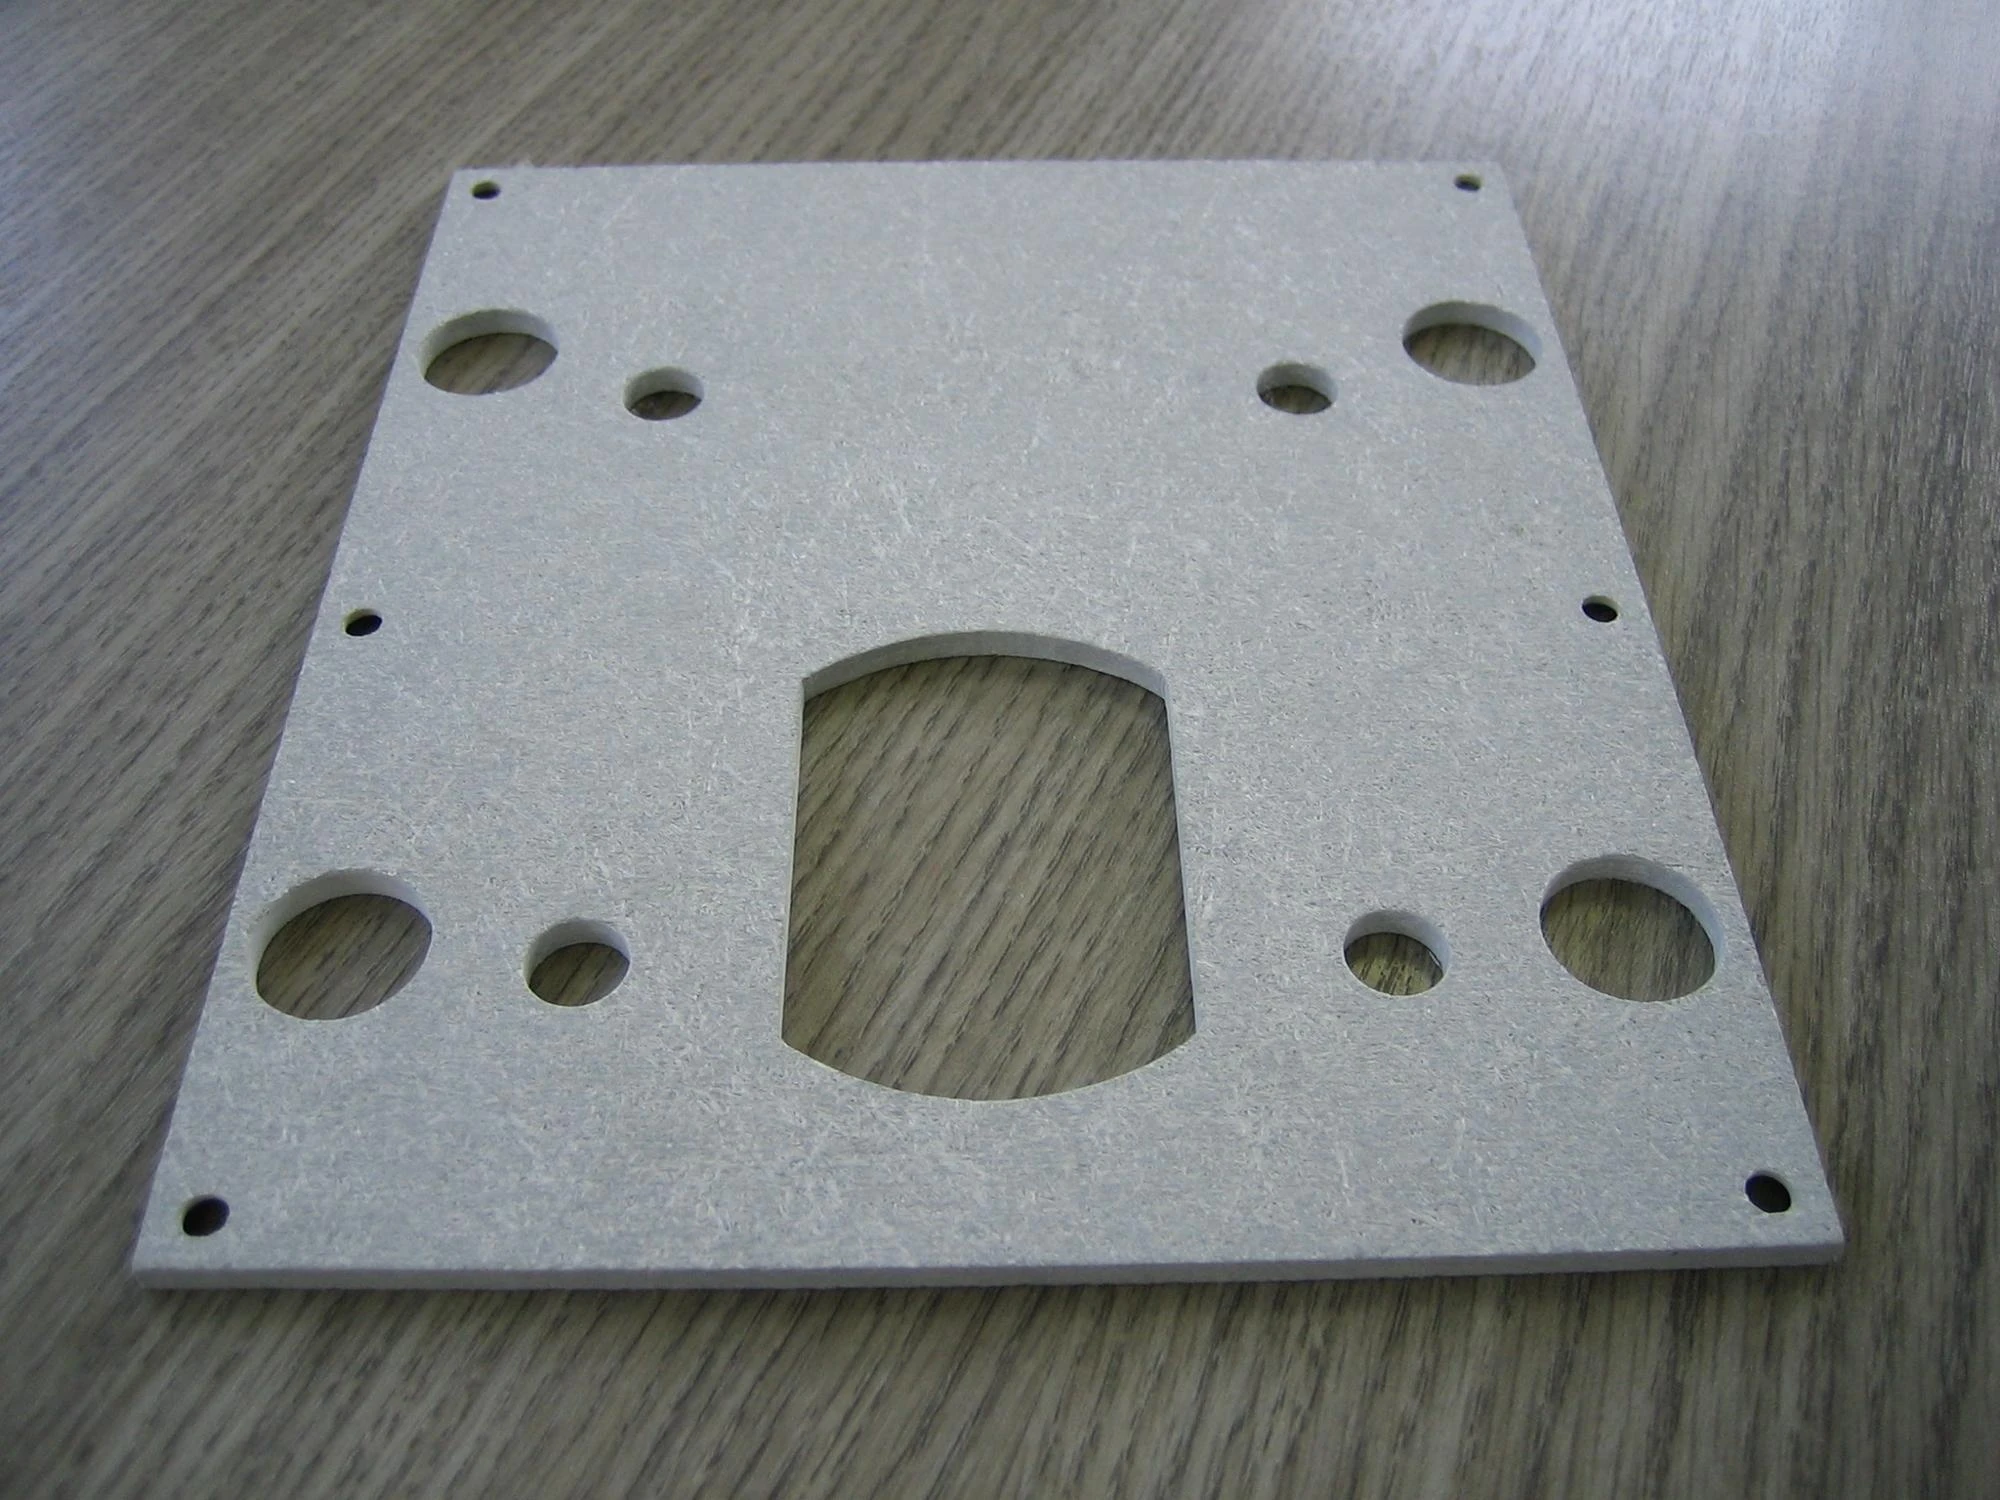 Thermal insulation board made in Japan